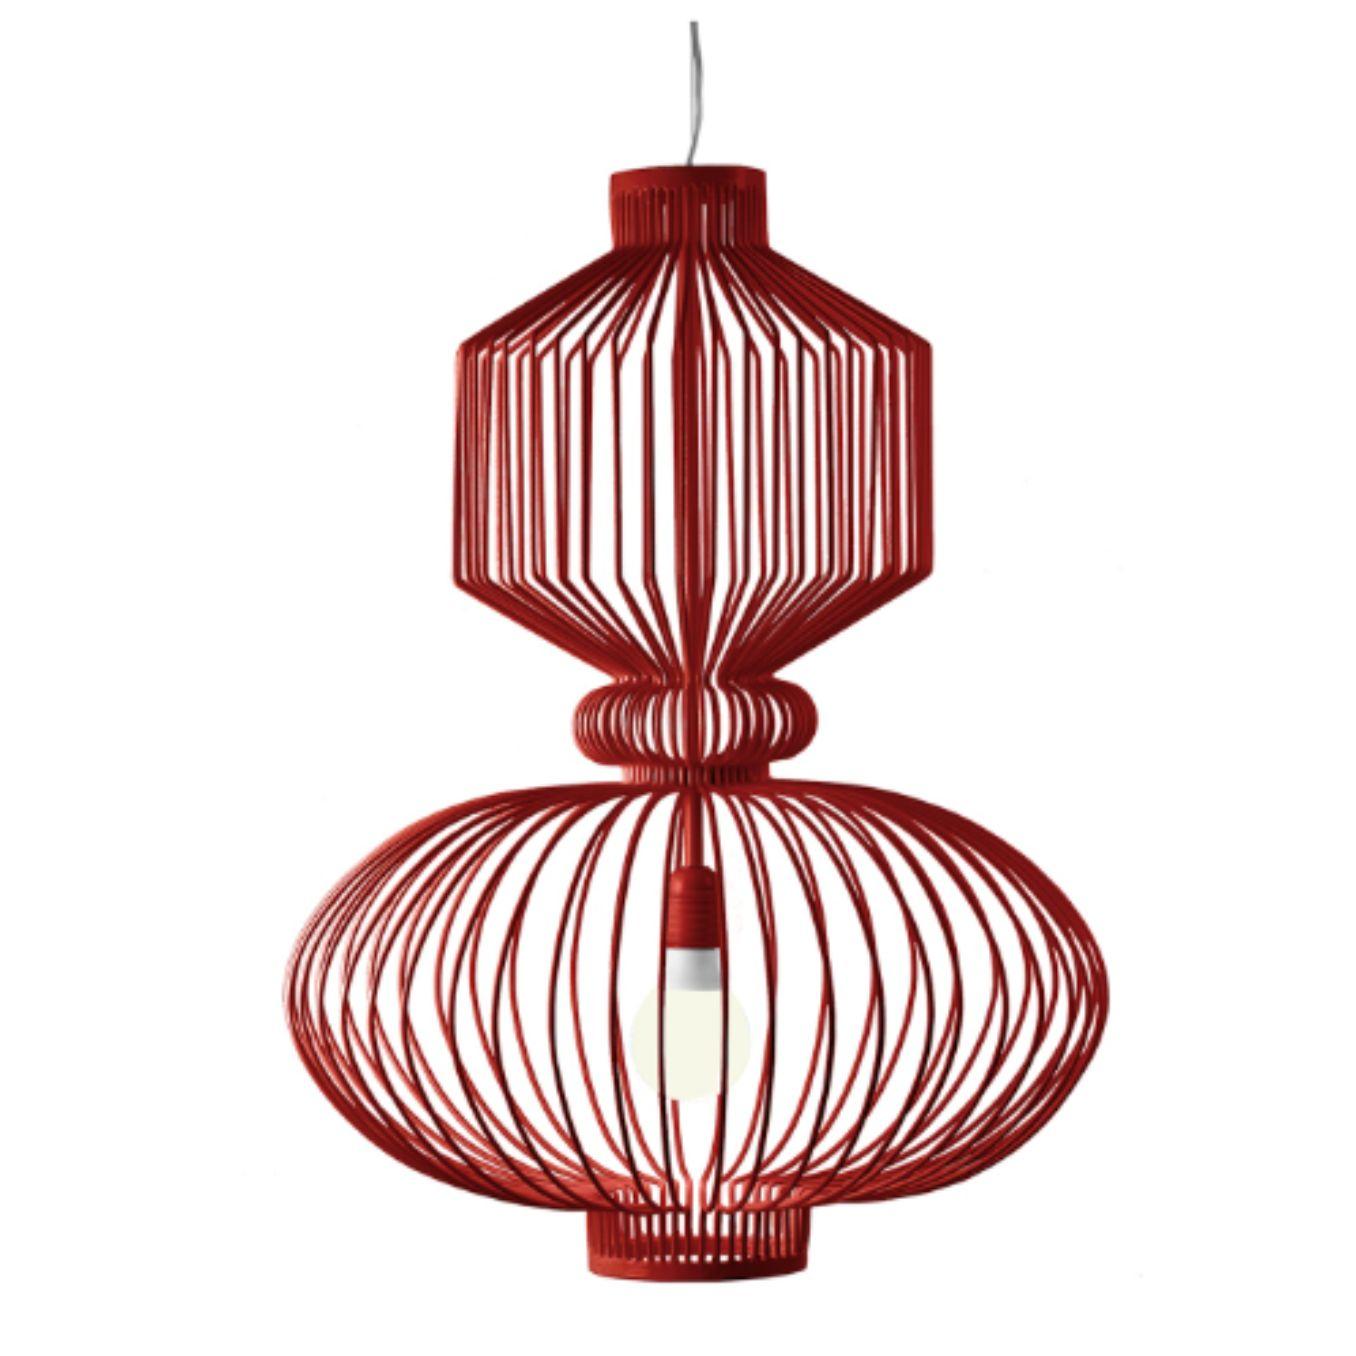 Lipstick Revolution suspension lamp by Dooq
Dimensions: W 55 x D 55 x H 70 cm
Materials: lacquered metal, polished or brushed metal
Also available in different colors and materials.

Information:
230V/50Hz
E27/1x20W LED
120V/60Hz
E26/1x15W LED
bulb